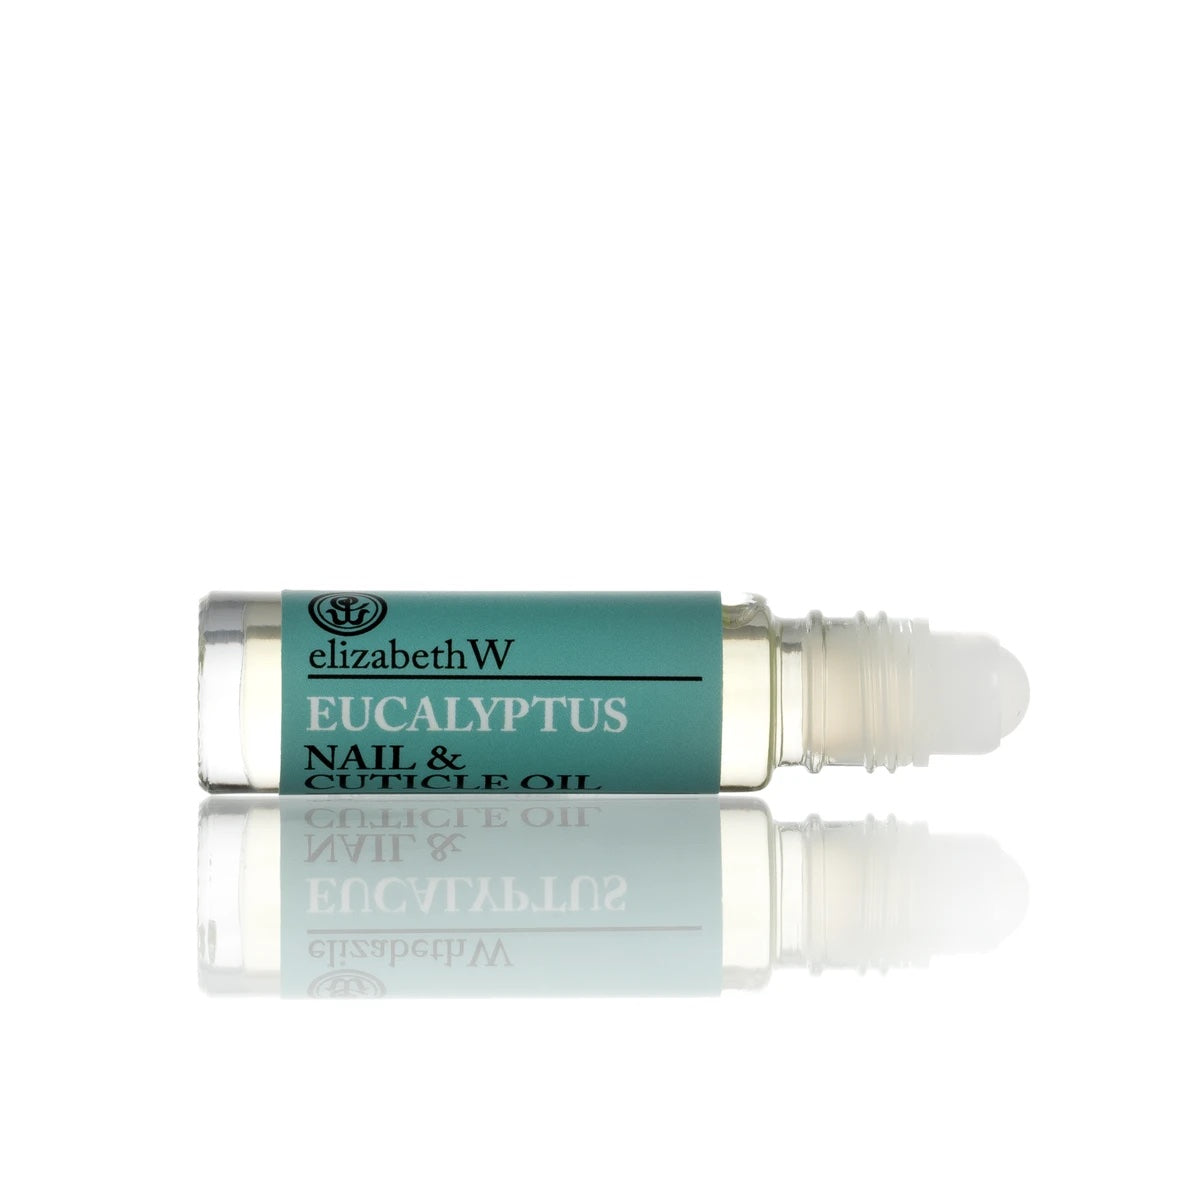 A roll-on bottle of elizabeth W Botanical Apothecary Eucalyptus Nail & Cuticle Oil, with a teal and white label, displayed on a reflective white surface.